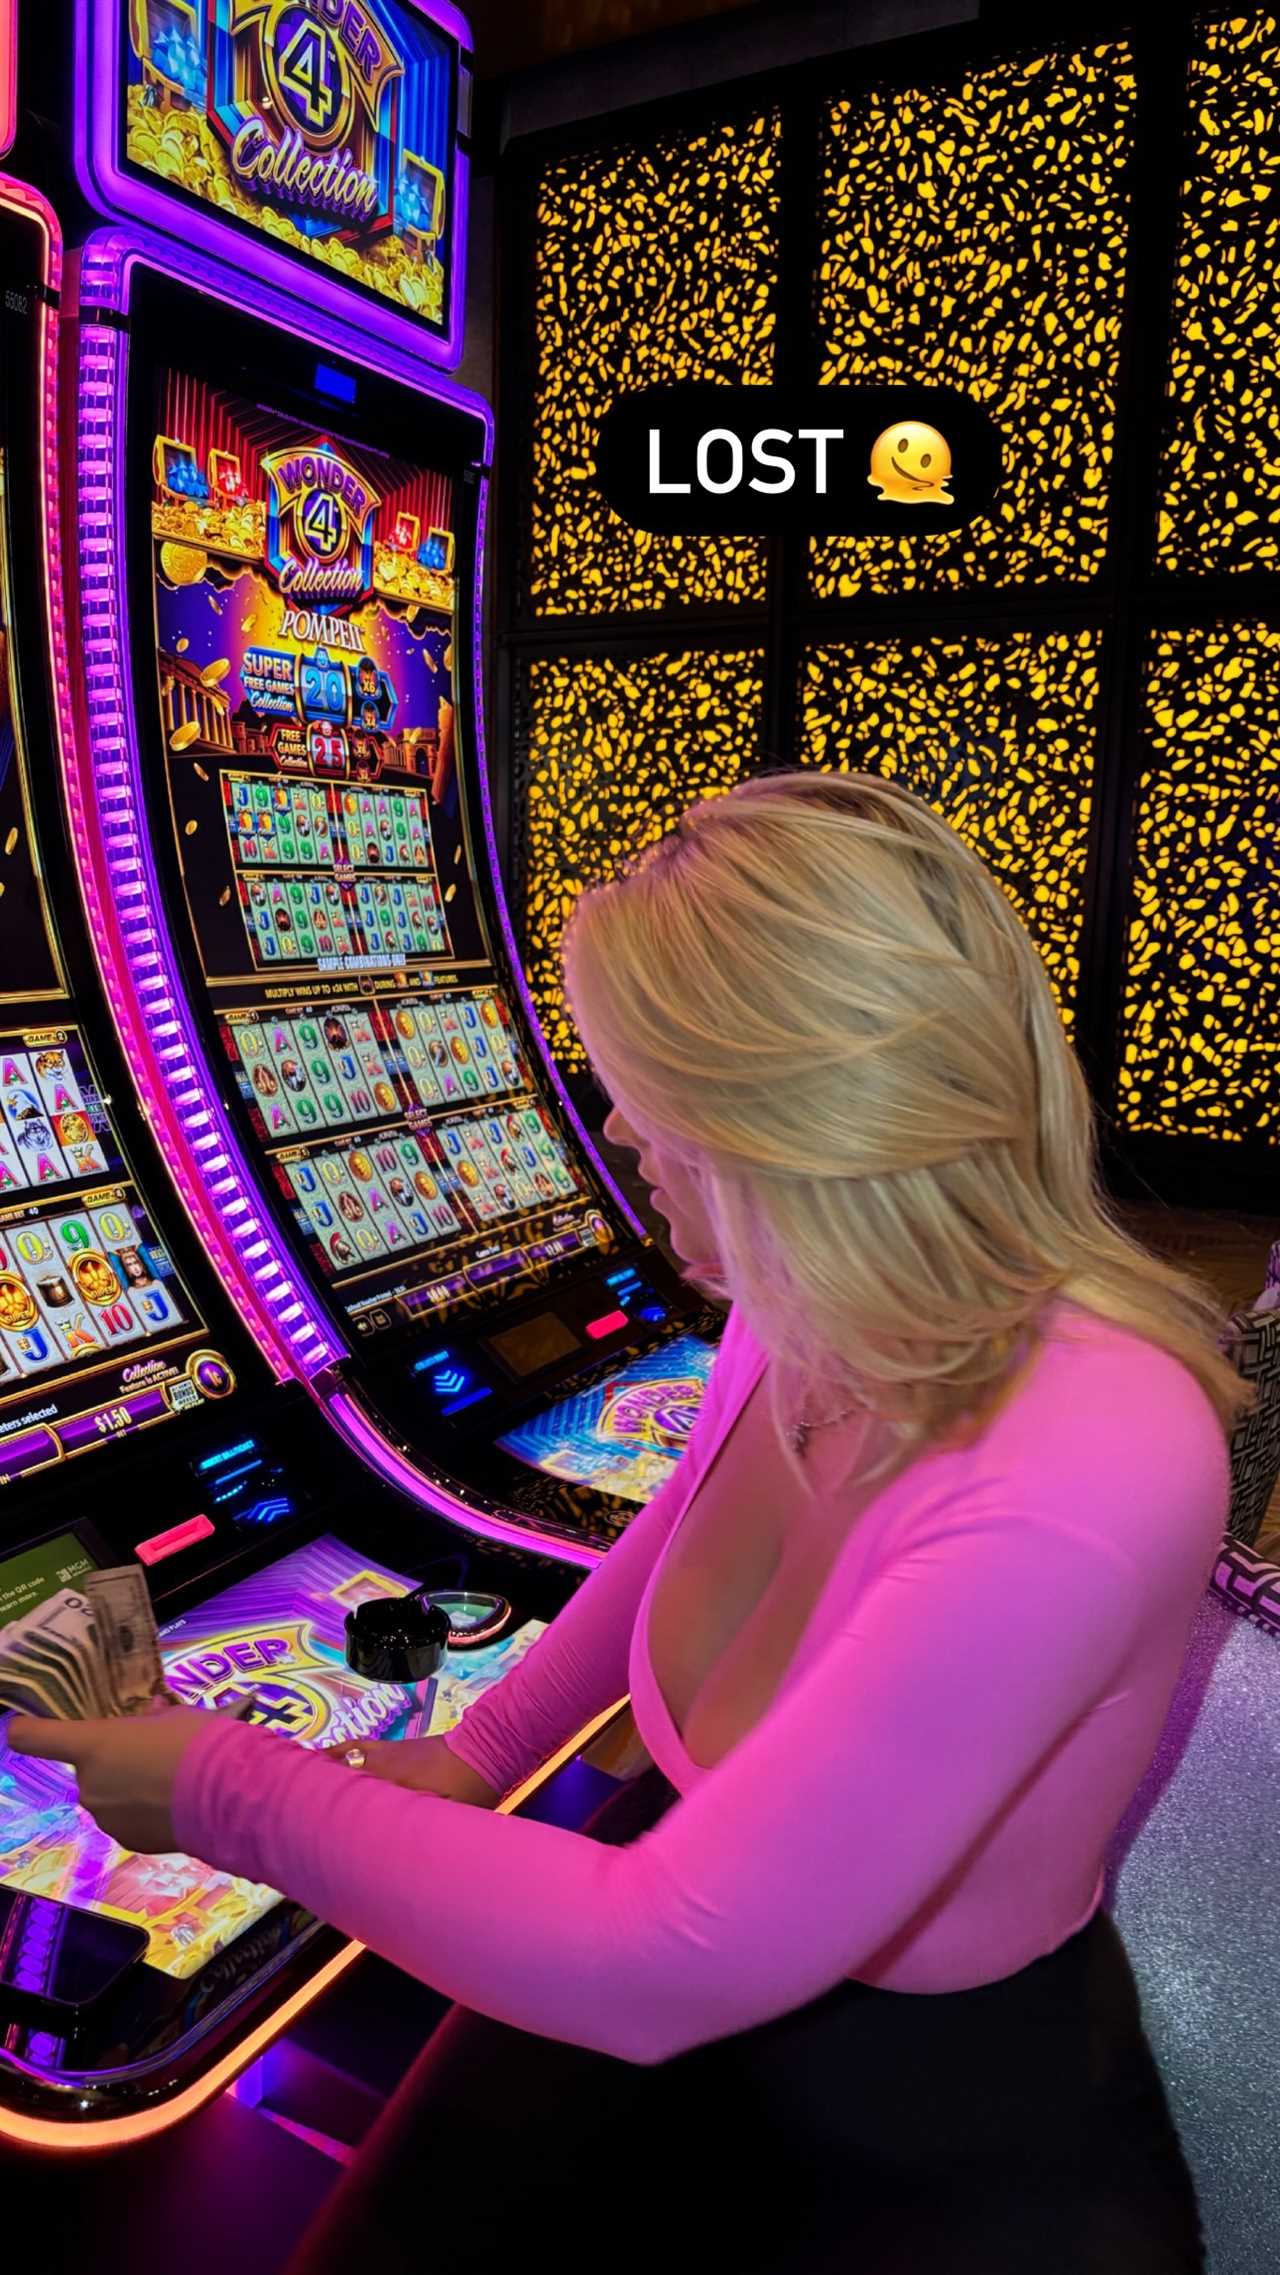 Boxing Ring Girl Apollonia Llewellyn Turns Heads in Busty Outfit on Las Vegas Slot Machine